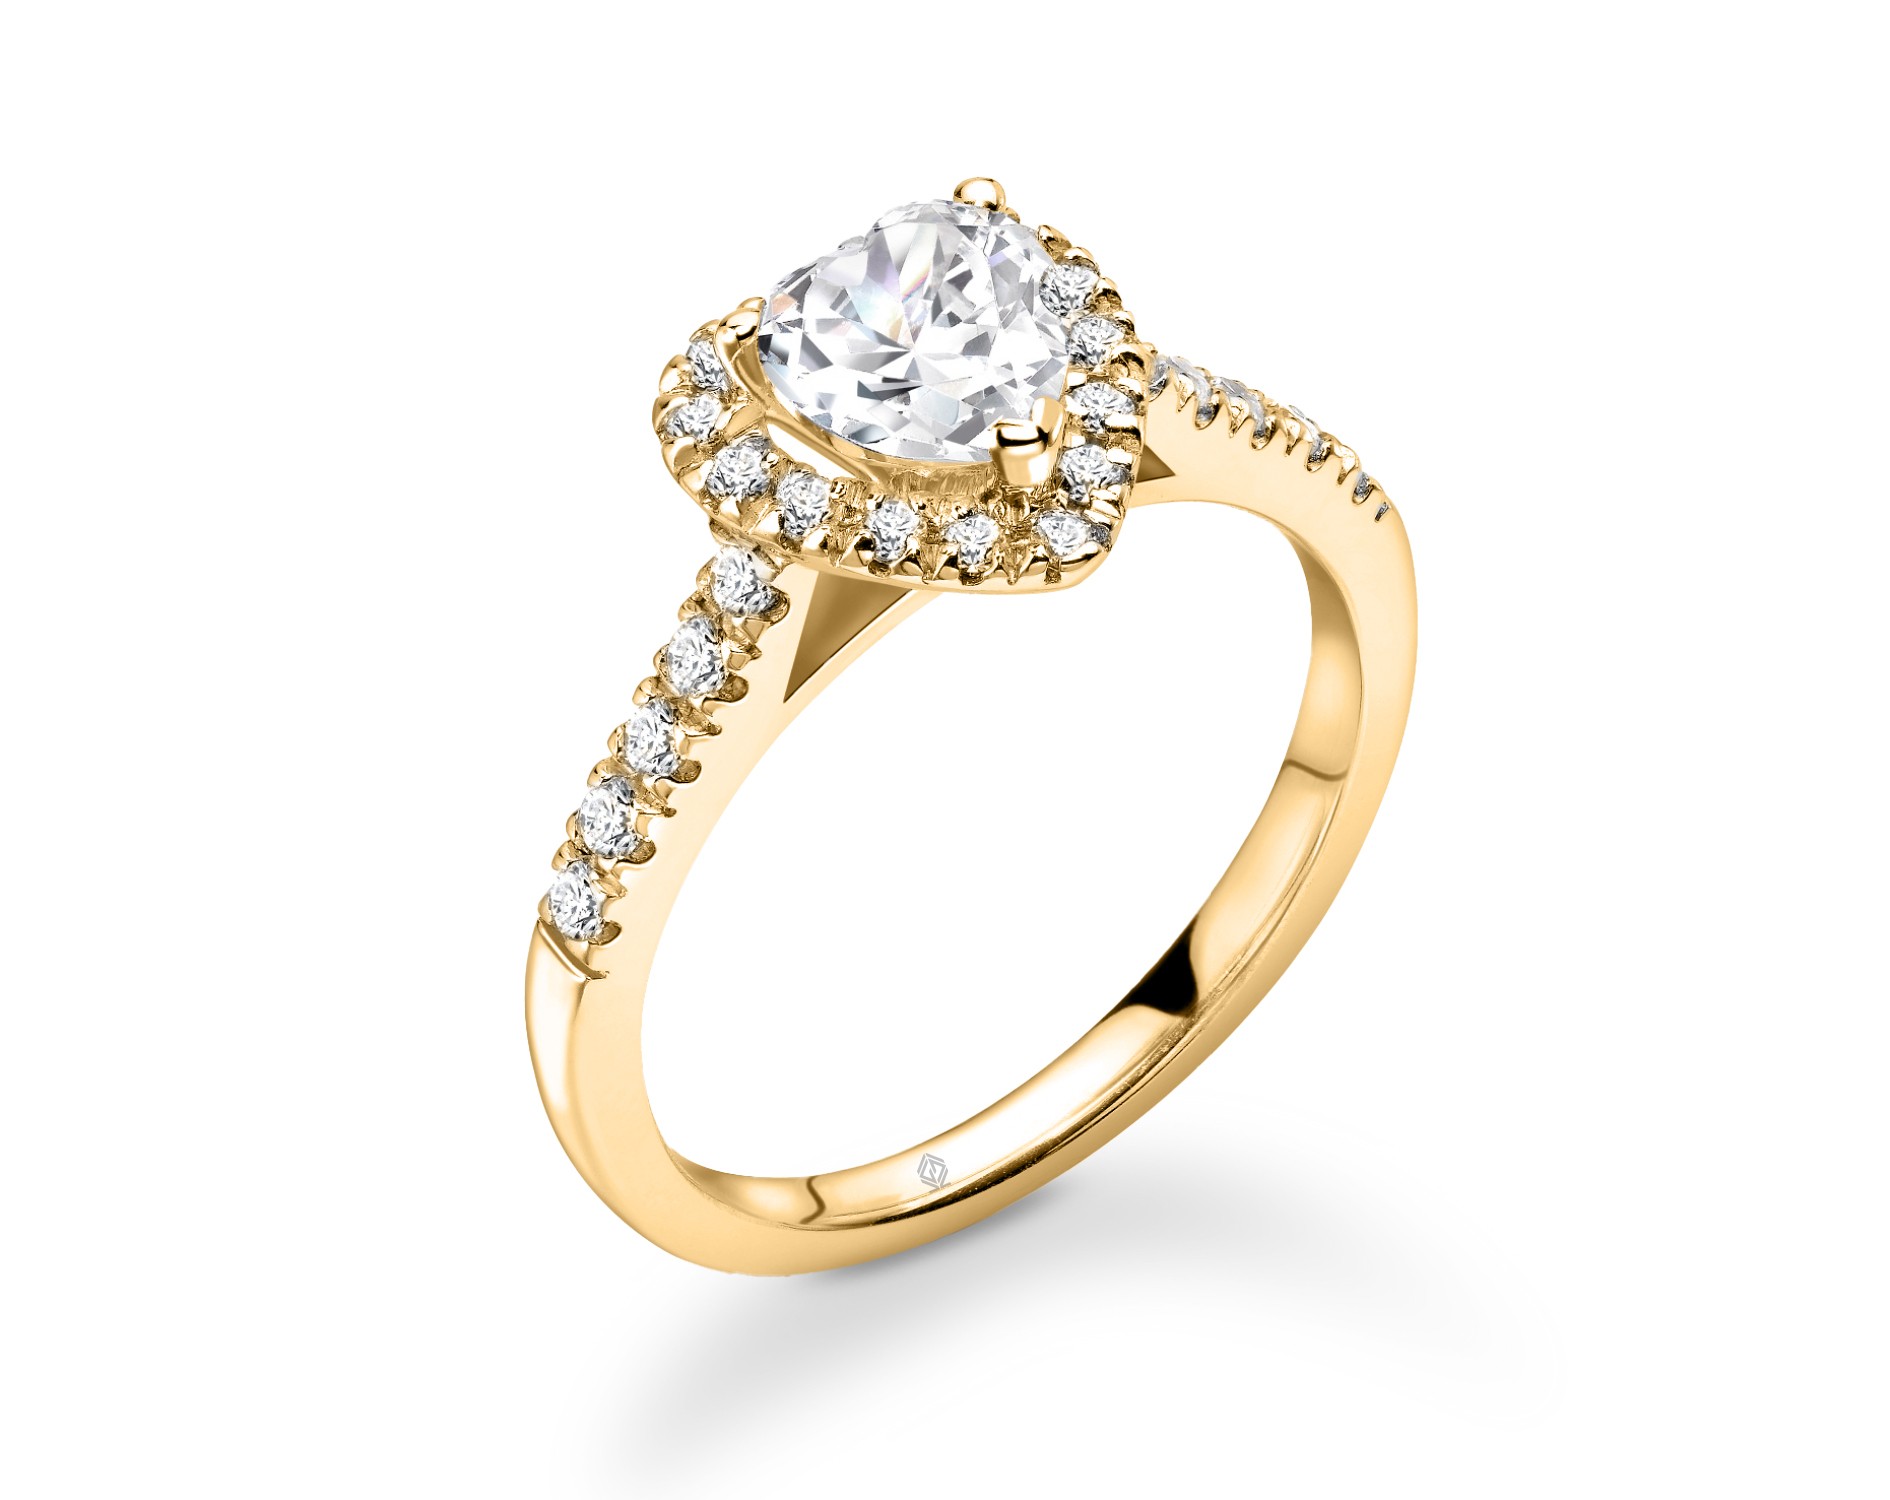 18K YELLOW GOLD HALO HEART CUT DIAMOND ENGAGEMENT RING WITH SIDE STONES PAVE SET